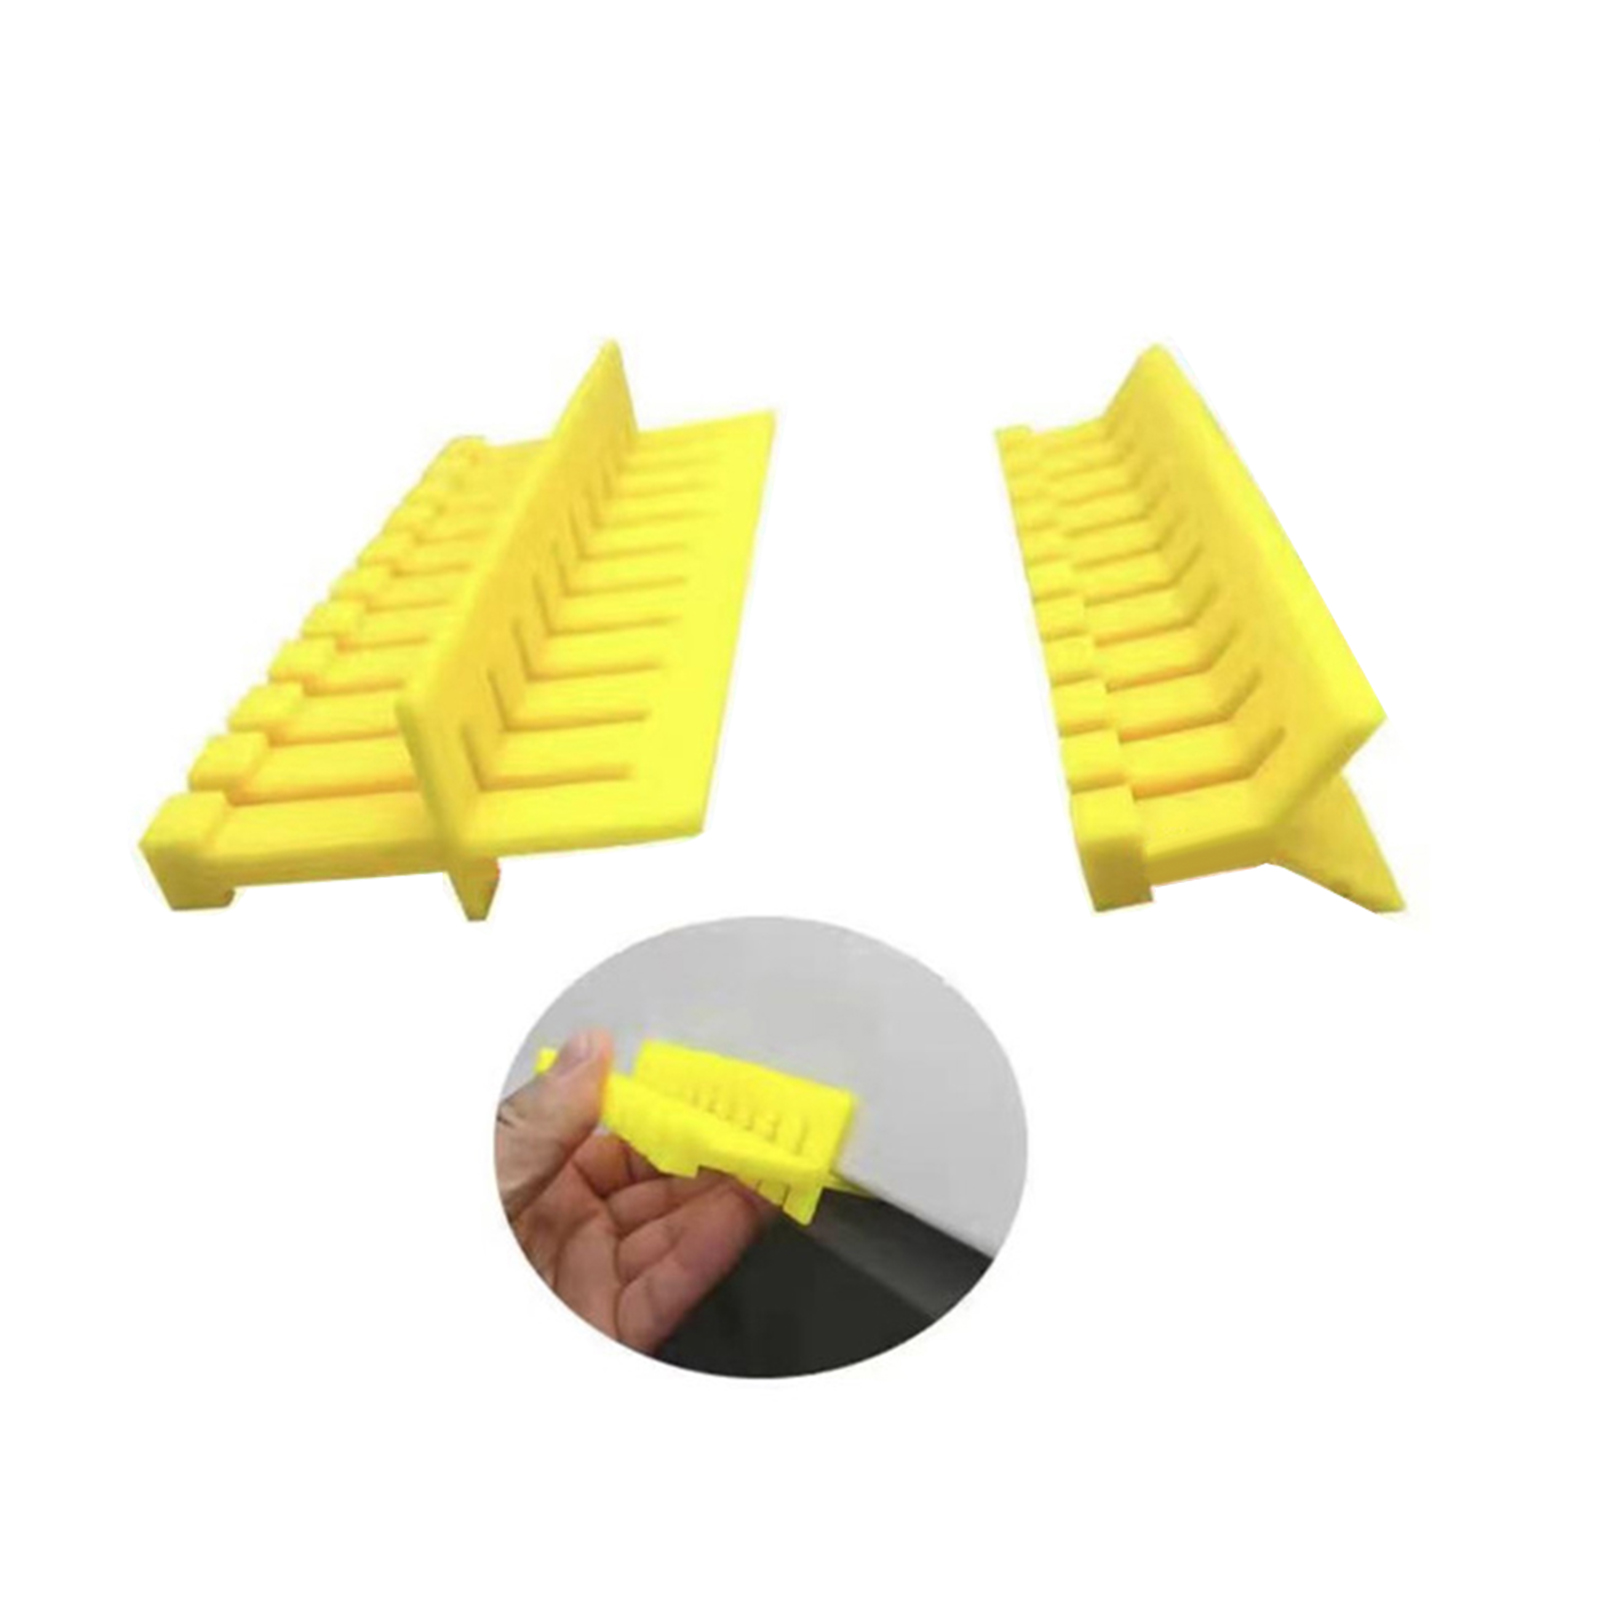 10Pcs Car Paintless Dent Repair Tool Paintless Dent Removal Kit Plastic Right Angle Sheet Puller Tabs Tools